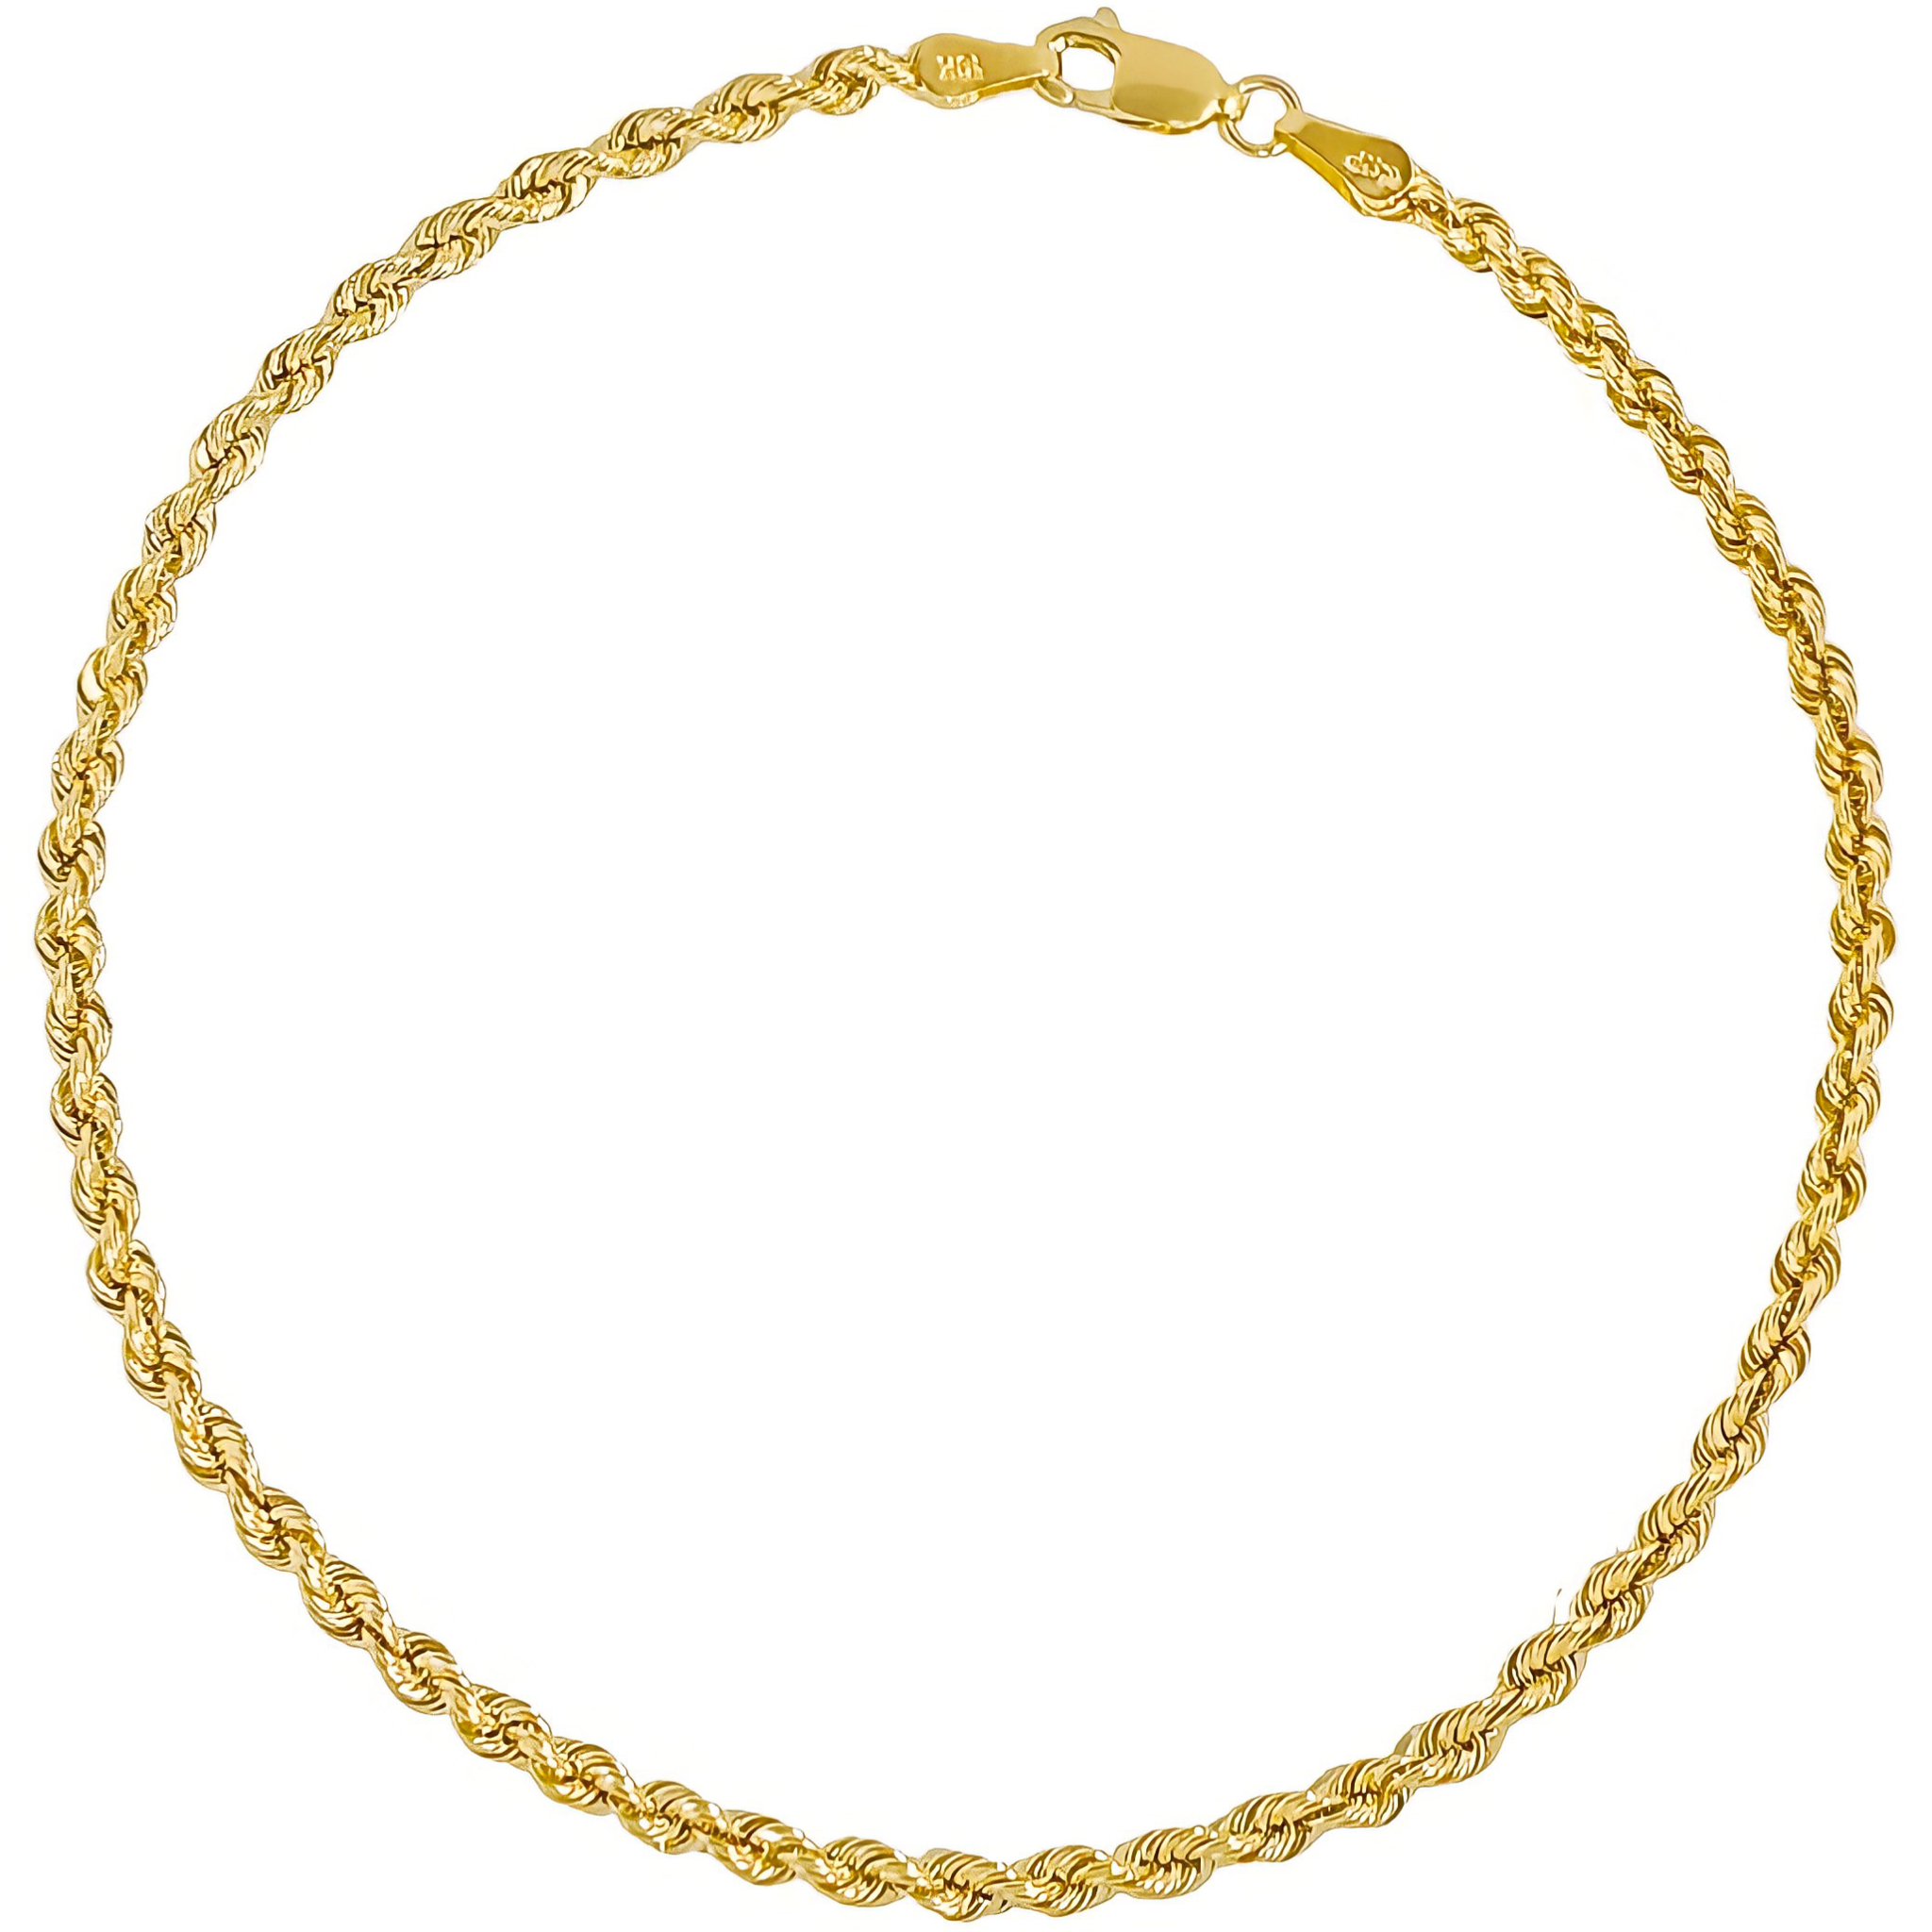 10K YELLOW GOLD ROPE ANKLET -3.5MM